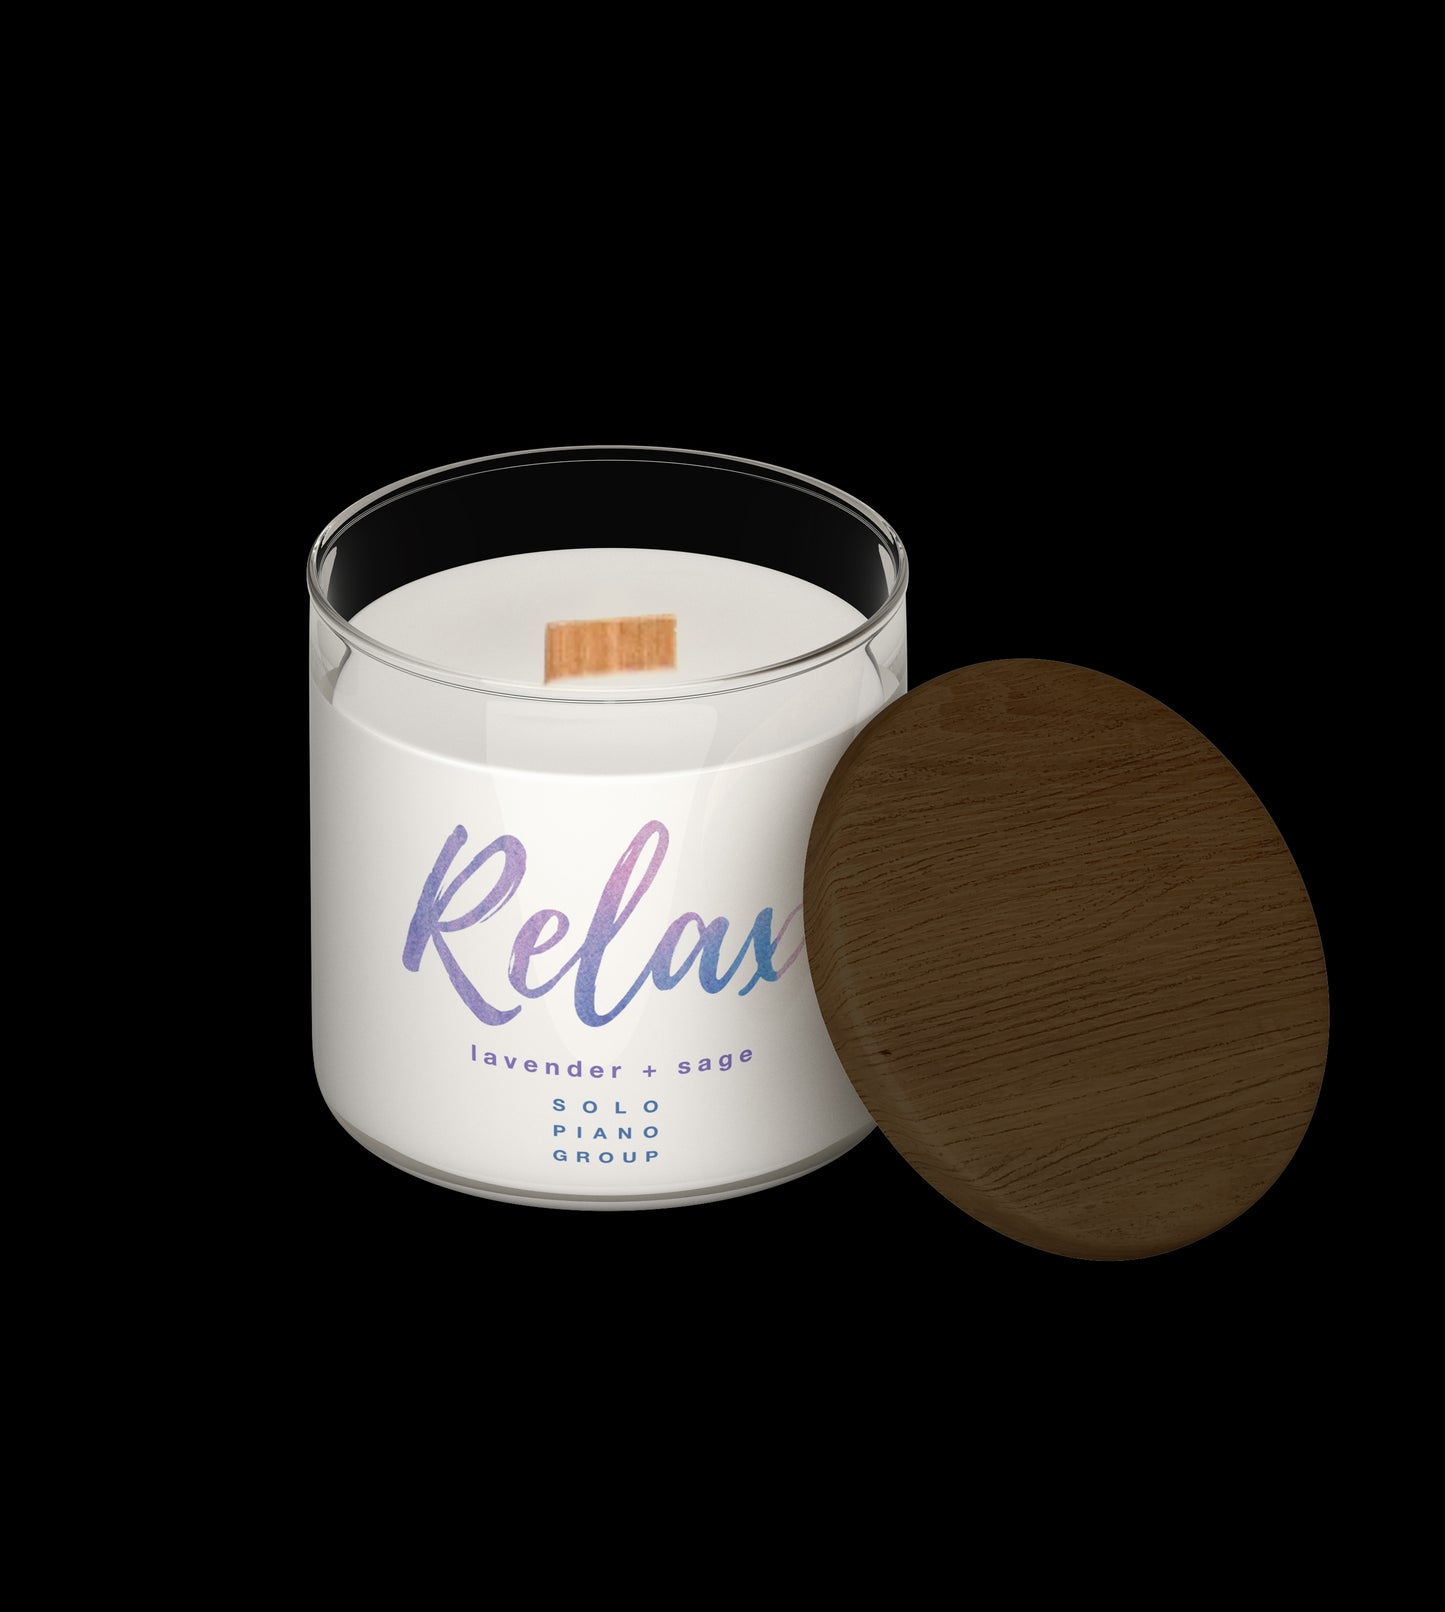 Relax Candle from Solo Piano Group